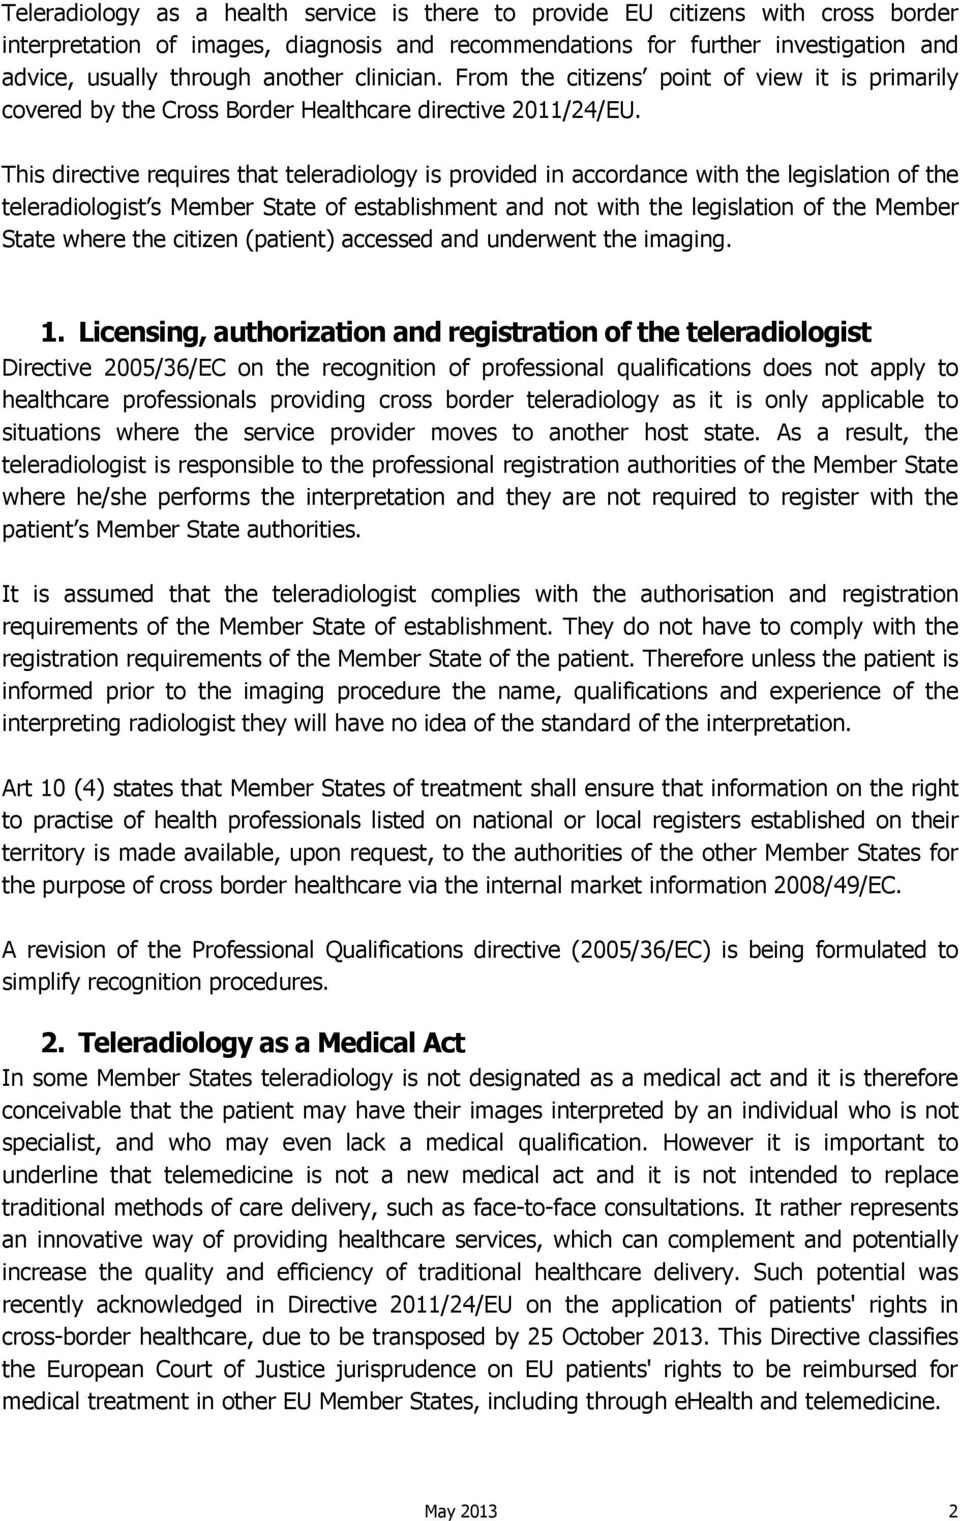 This directive requires that teleradiology is provided in accordance with the legislation of the teleradiologist s Member State of establishment and not with the legislation of the Member State where